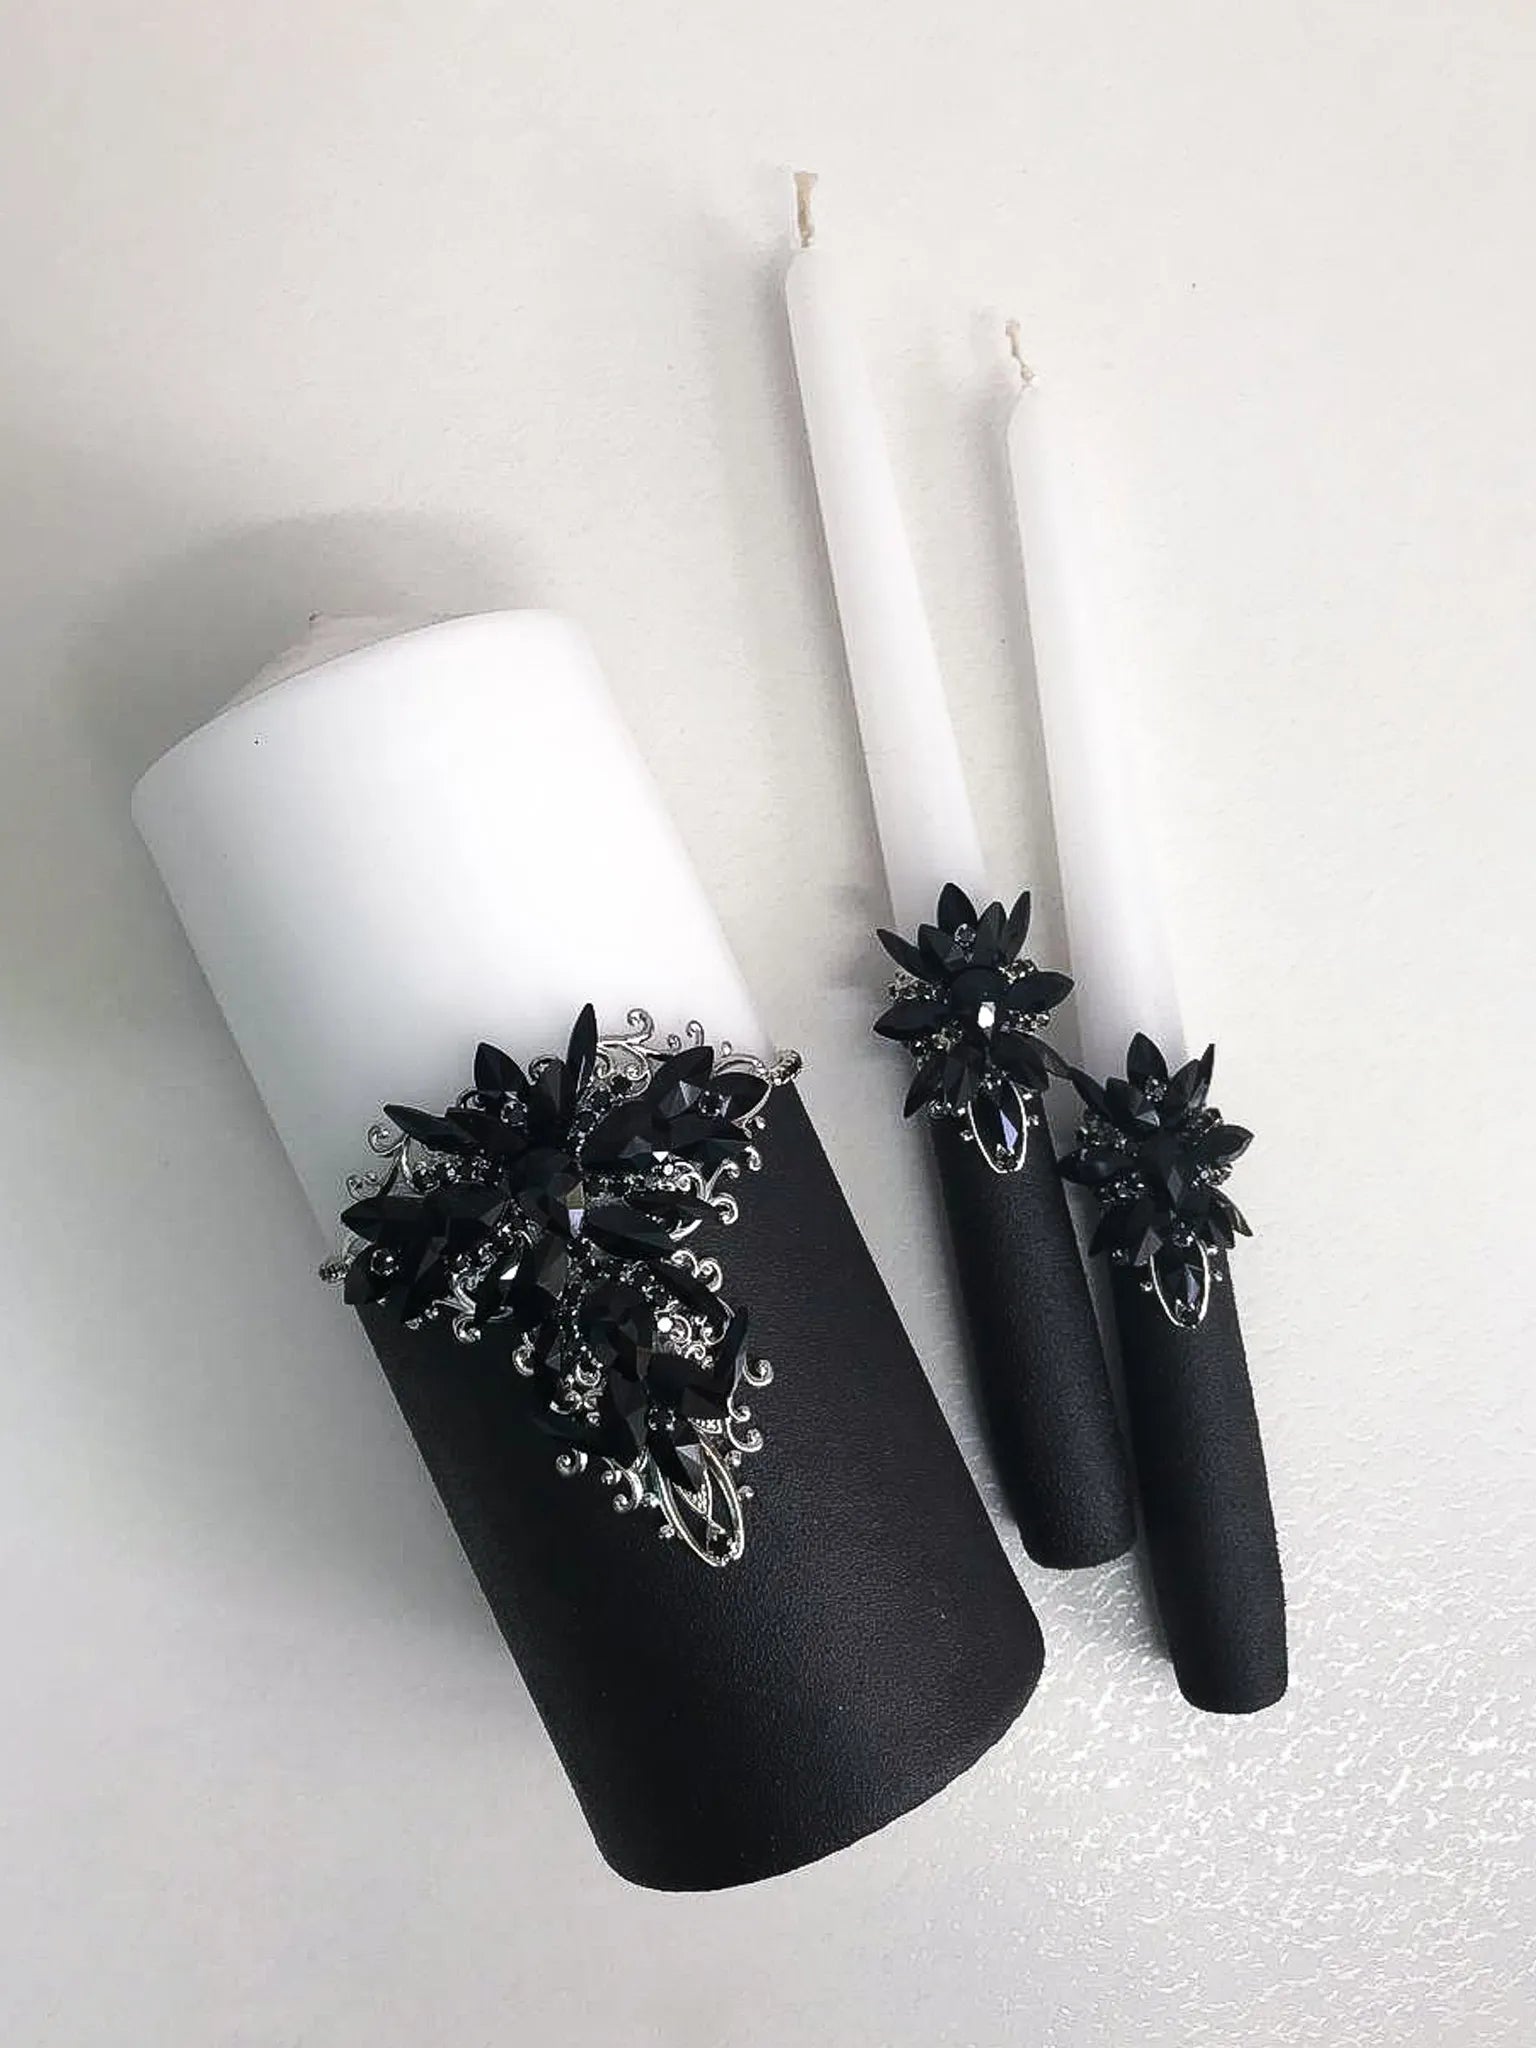 Personalized wedding unity candles with black crystals